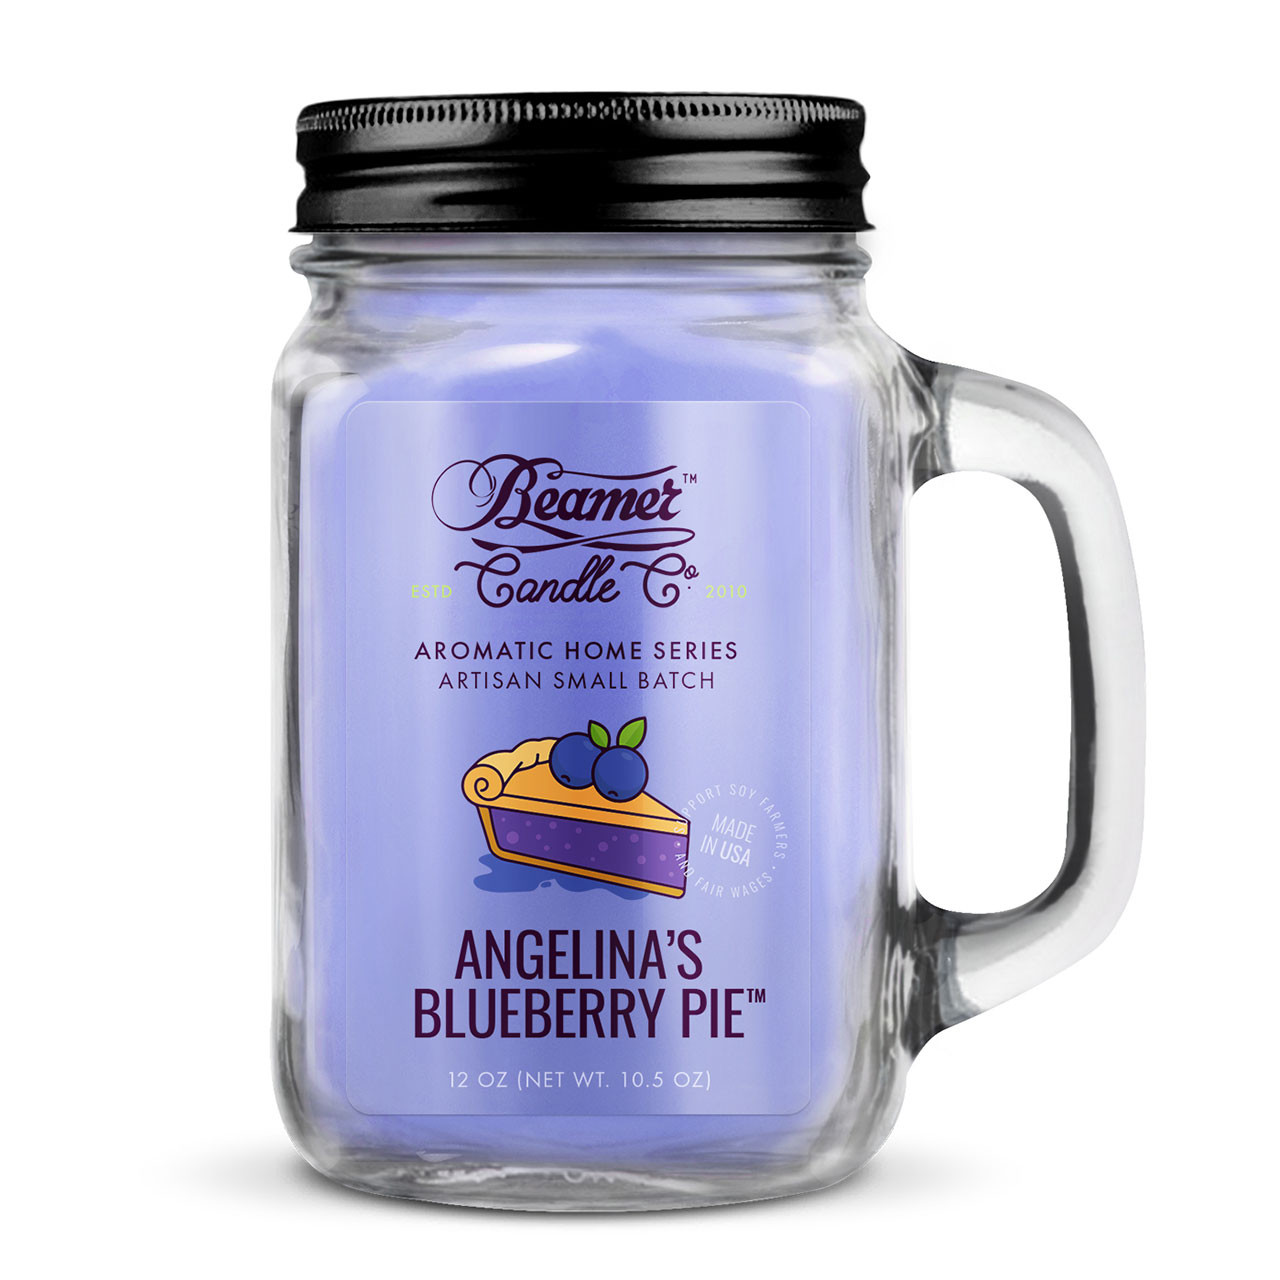 Beamer Aromatic Home Series Candle - Angelina's Blueberry Pie Scent Smoke